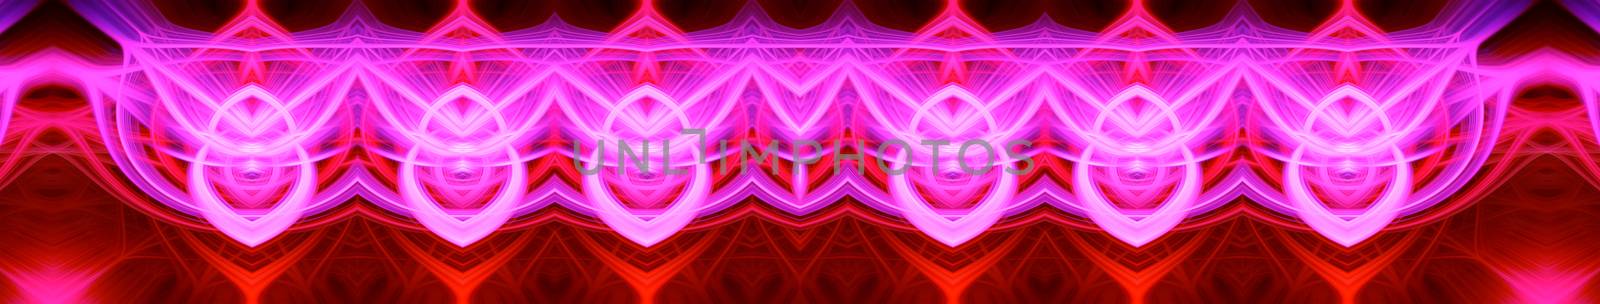 Beautiful abstract intertwined glowing 3d fibers forming a shape of pointy domes, sparkle, flame, flower, interlinked hearts. Purple, maroon, pink, and red colors. Banner size. Illustration by DamantisZ